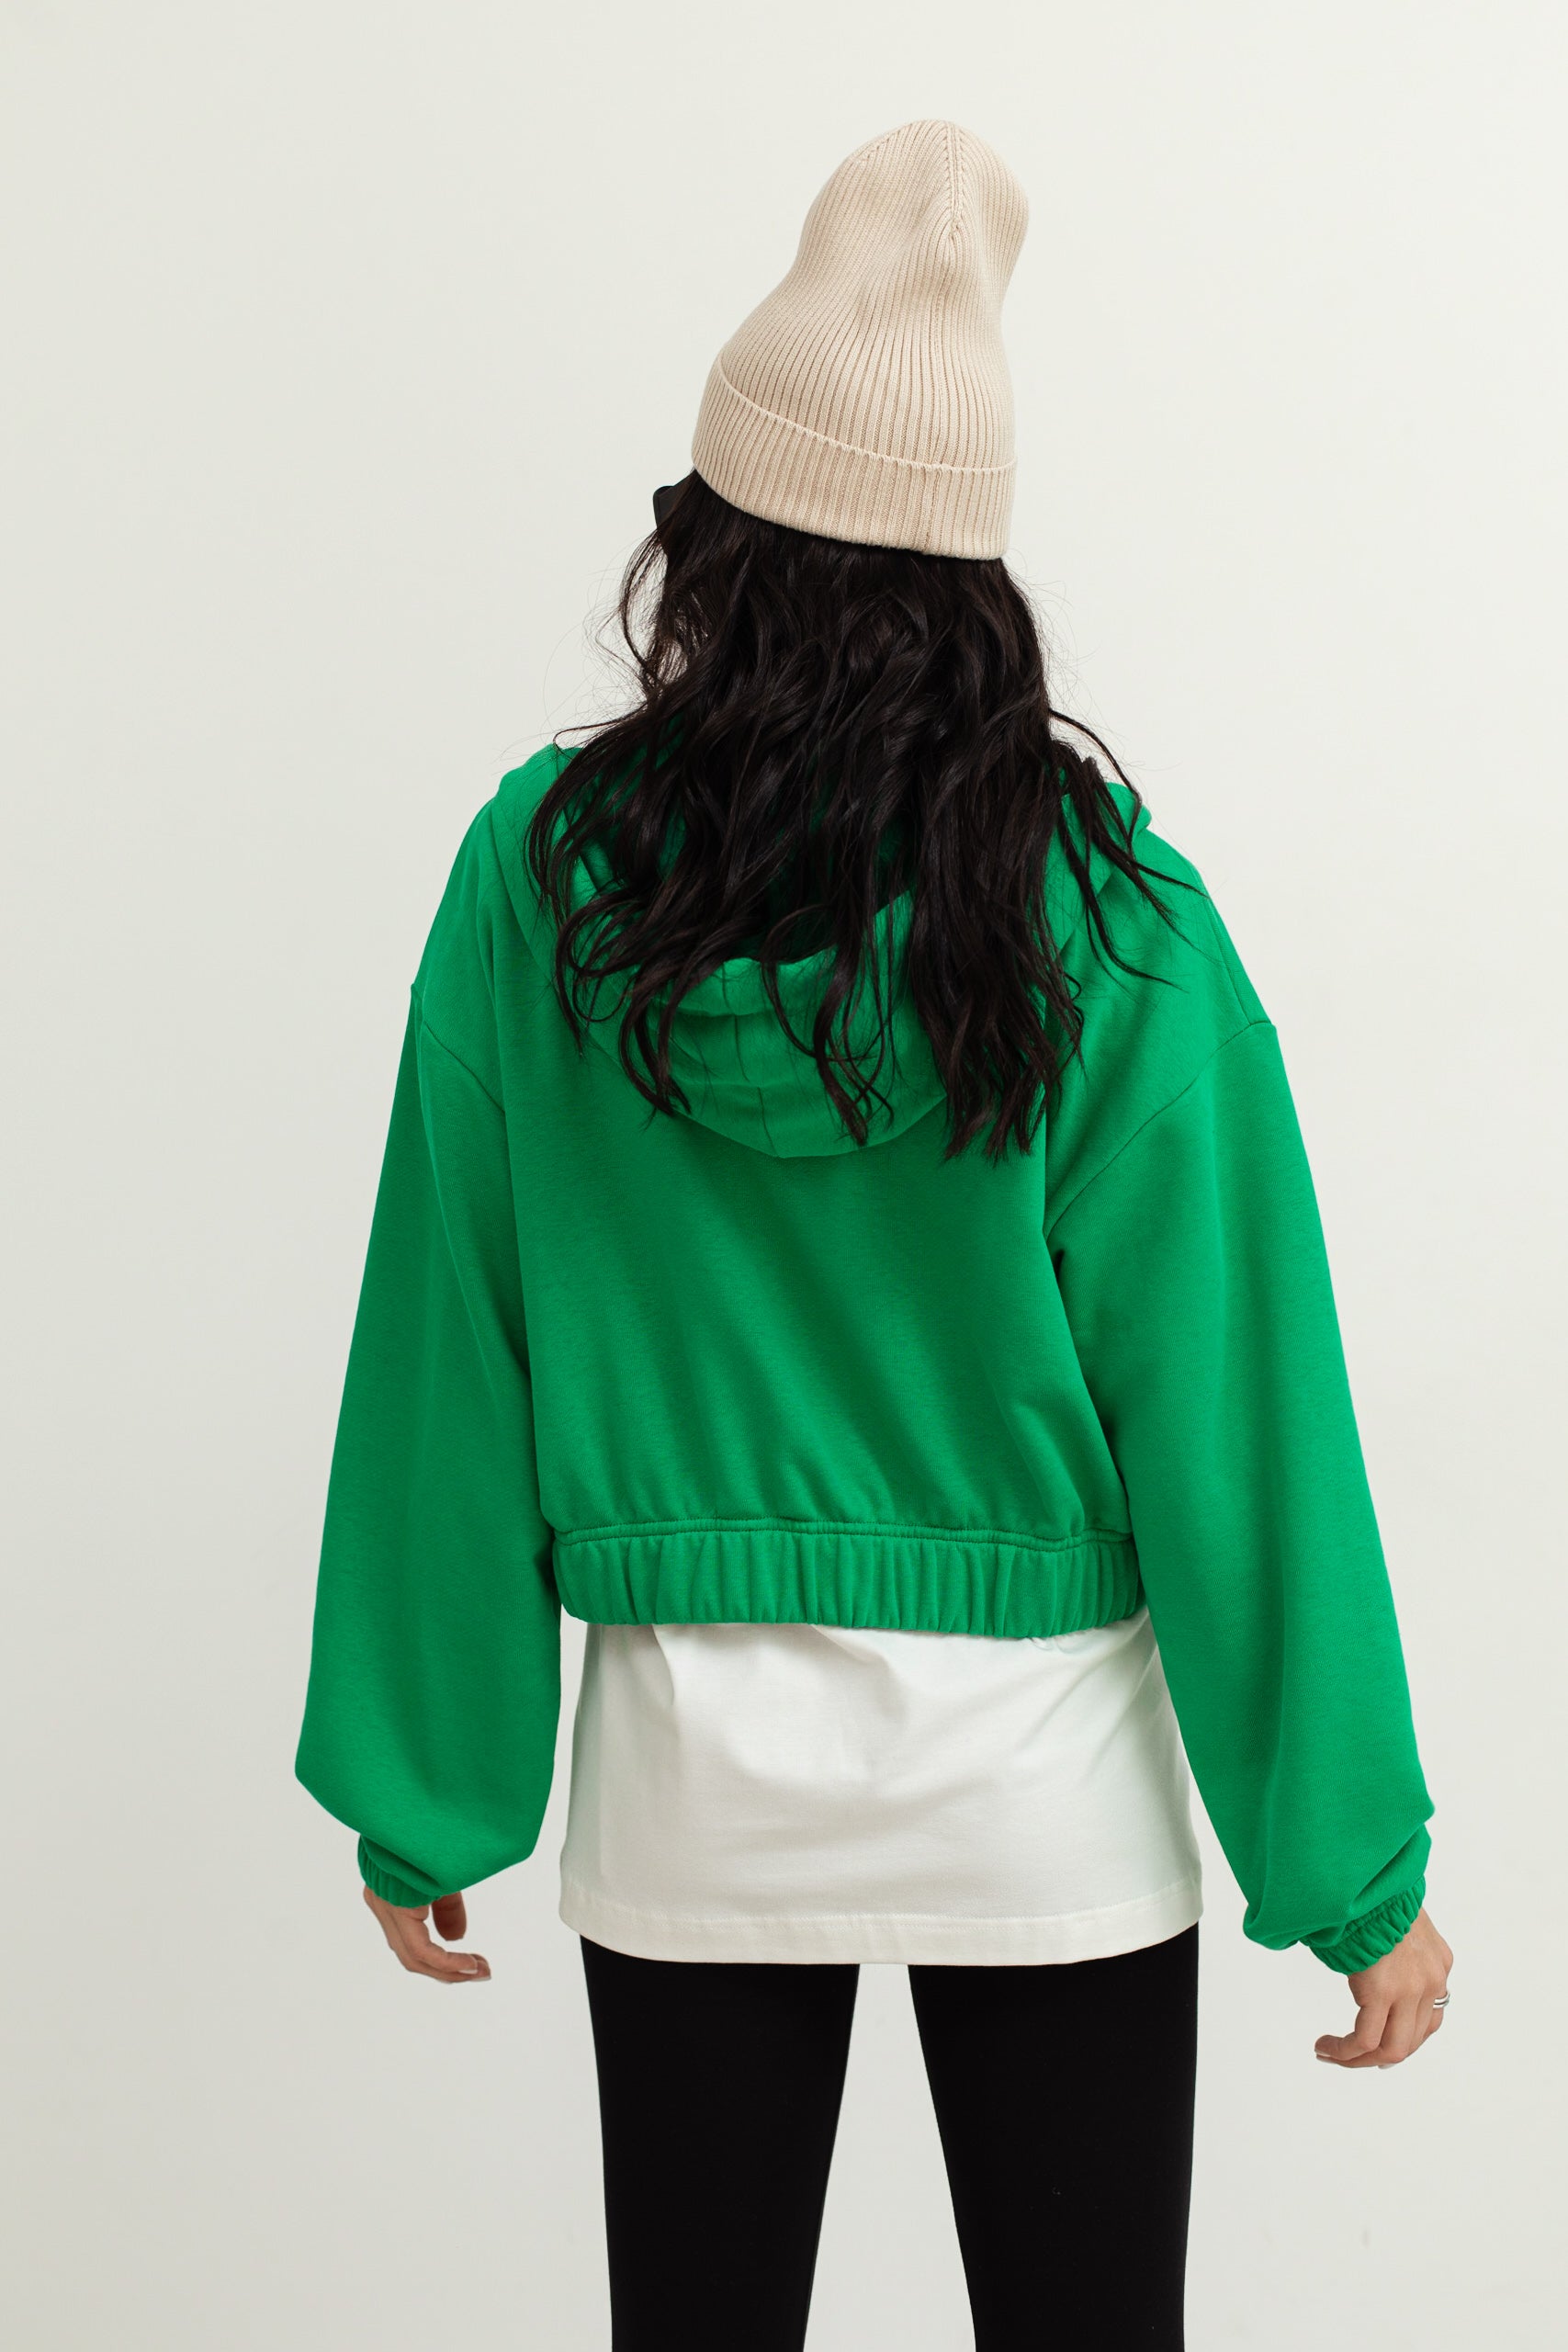 Short "Active" hoodie with a zipper in green color